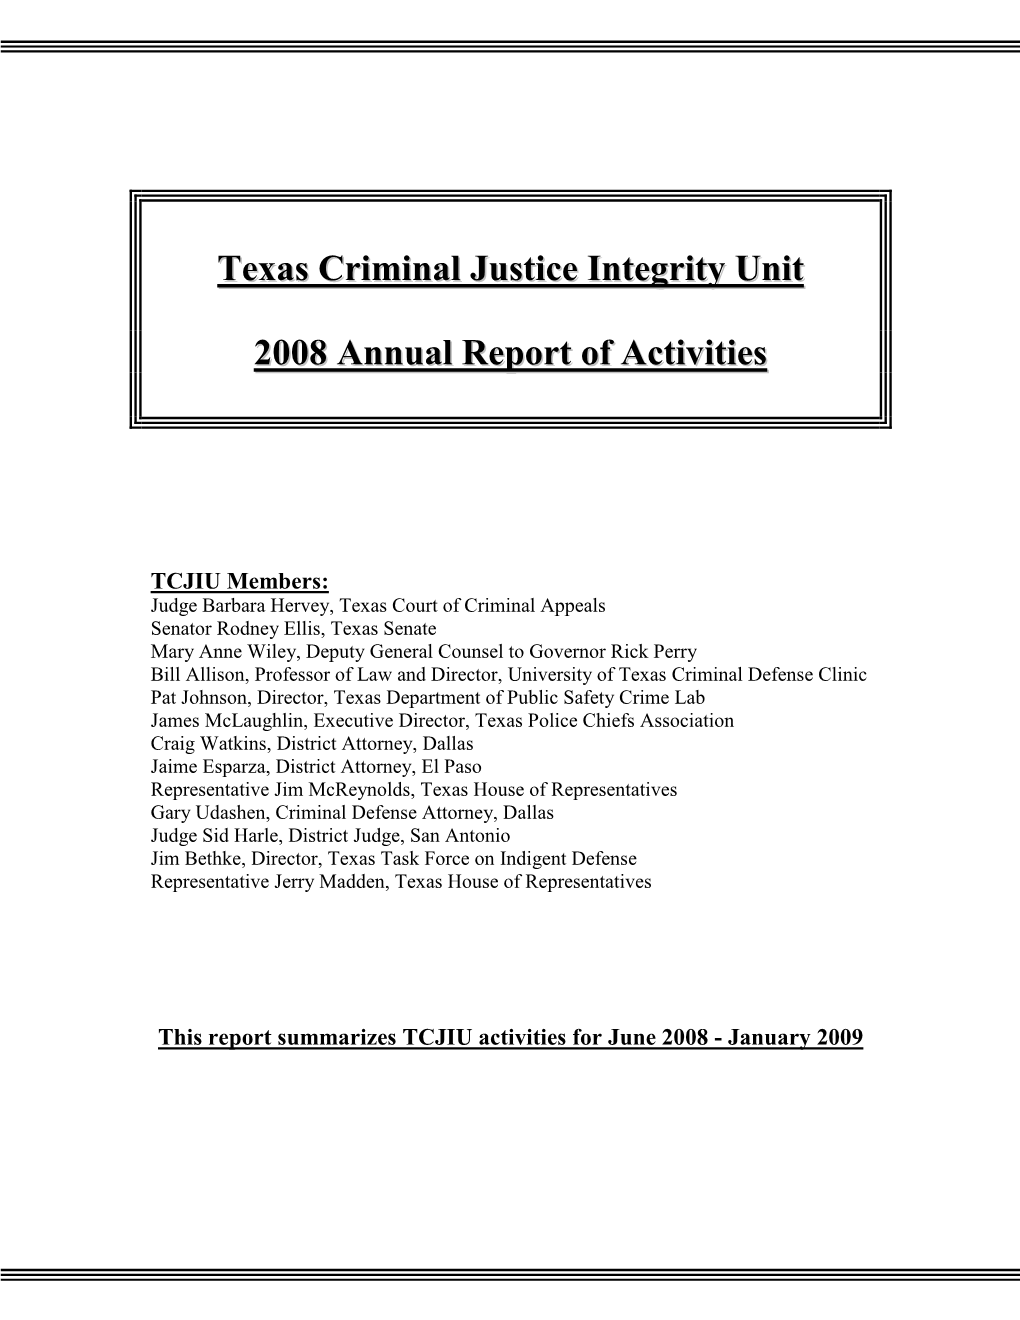 2008 Annual Report of Activities